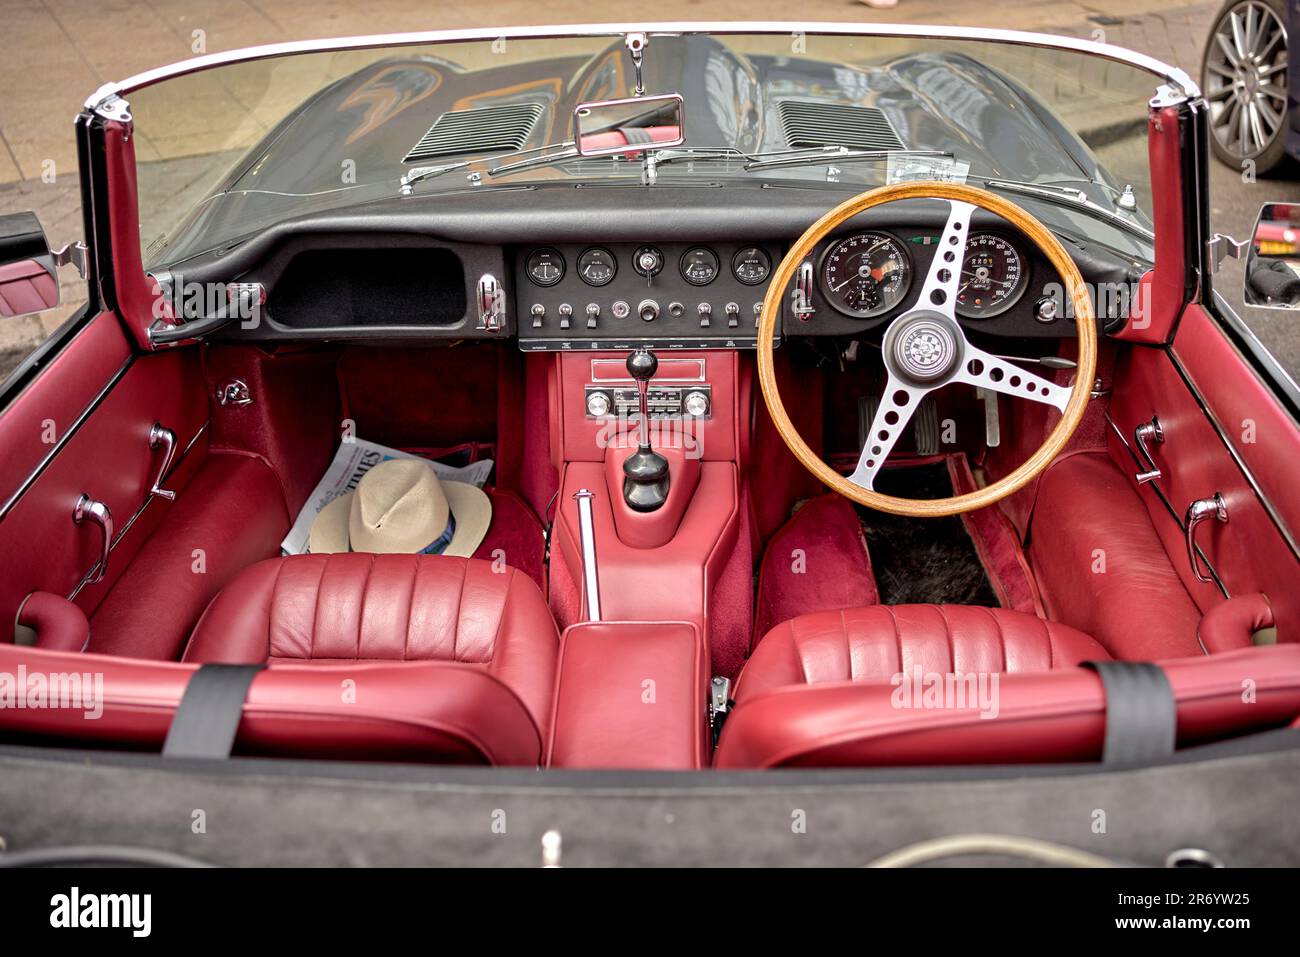 Jaguar E Type interior, red leather, 1965 4.2 litre convertible. Iconic English sports car. Stock Photo